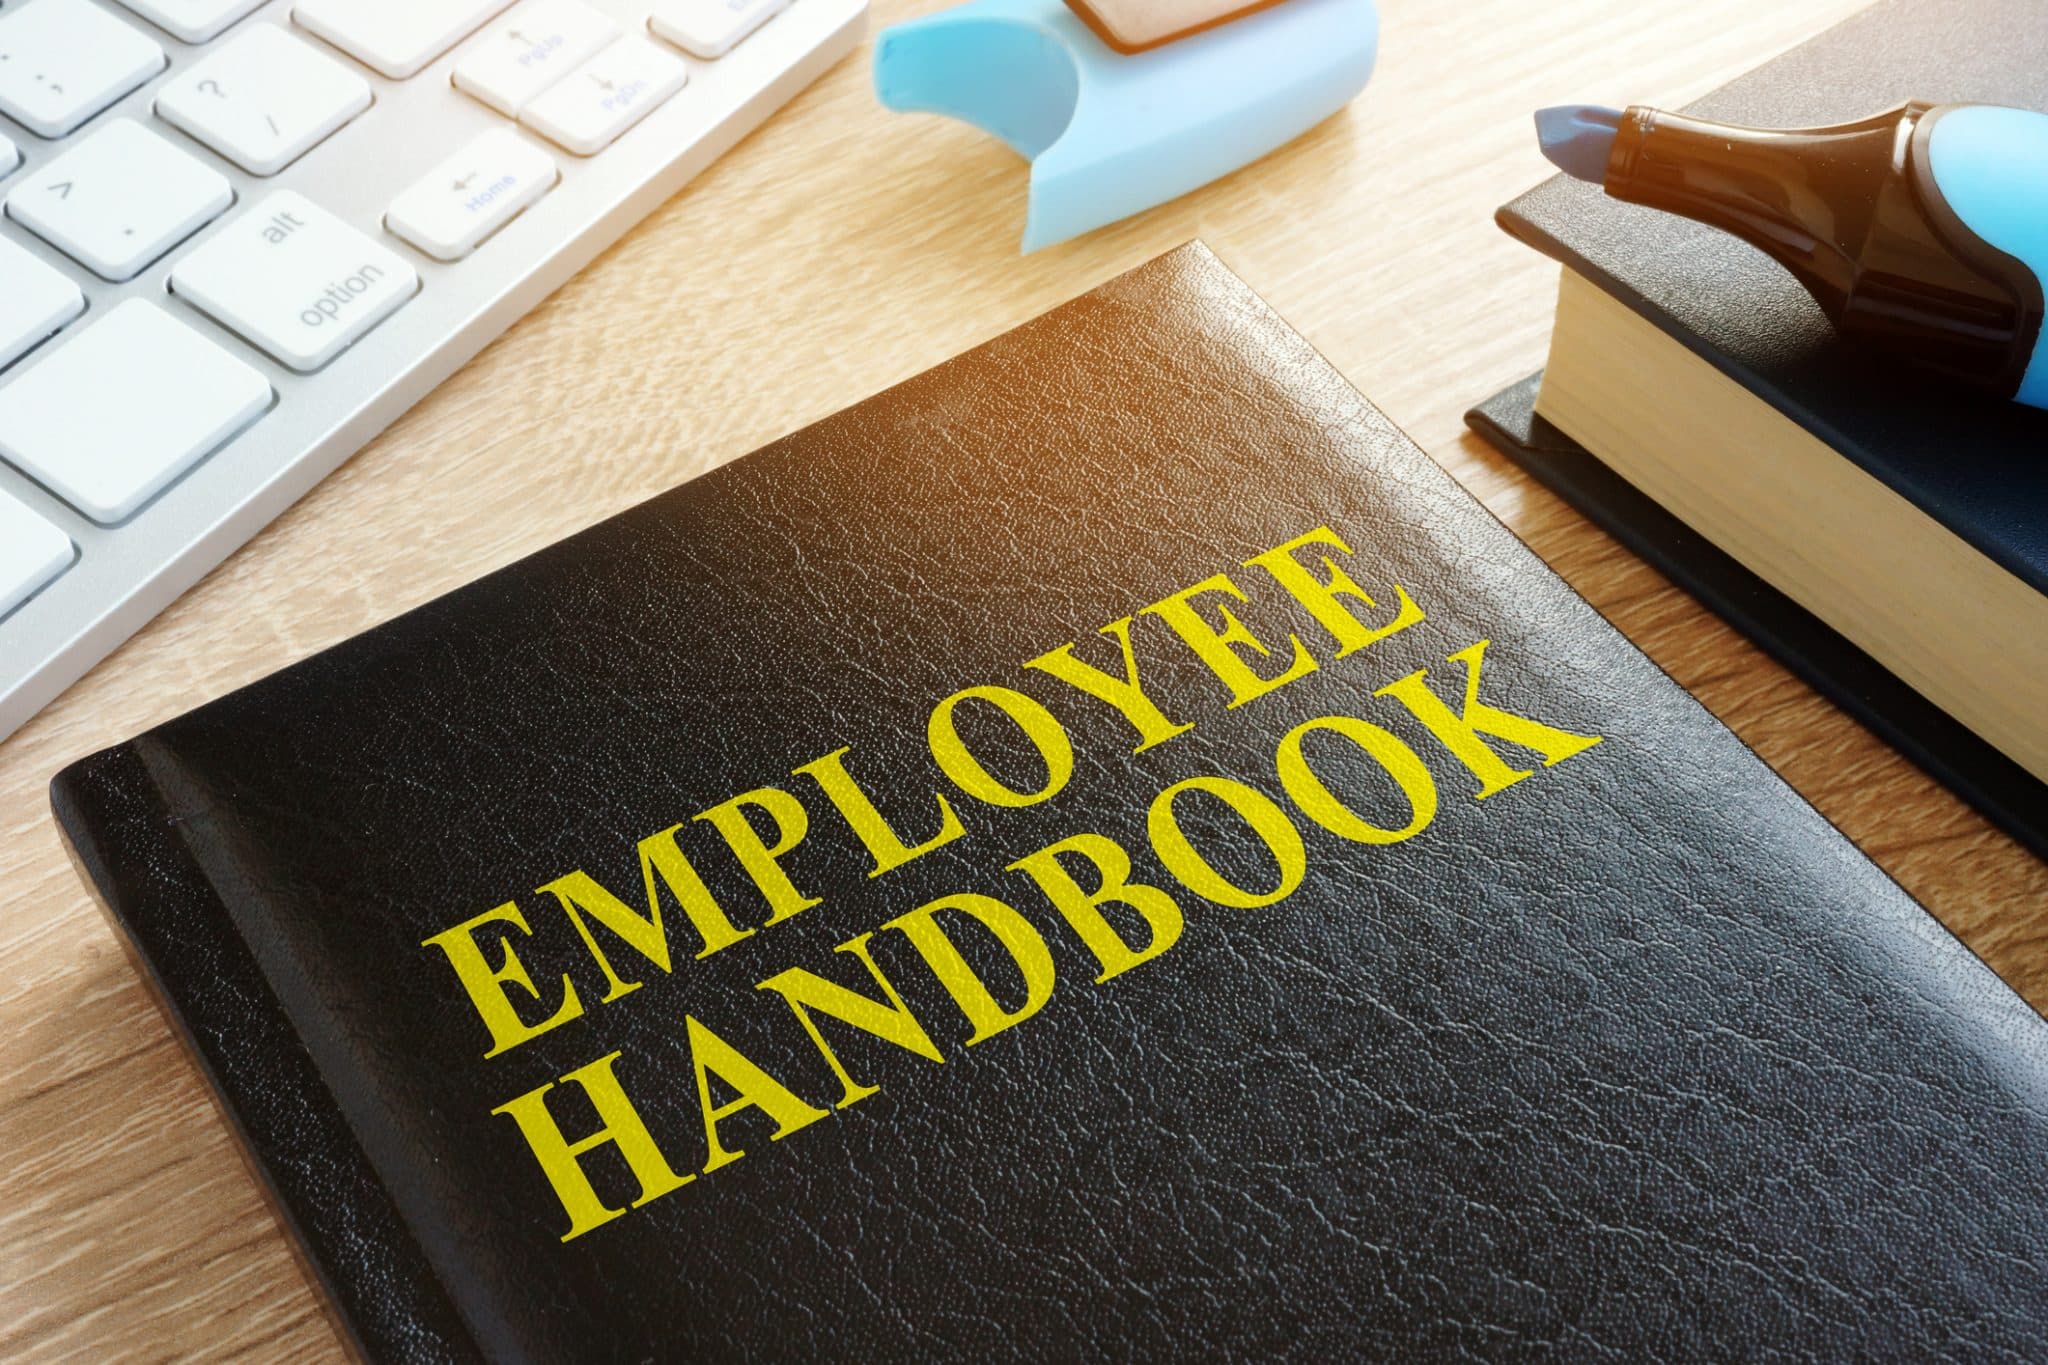 employee-handbooks-are-a-must-have-for-any-business-the-hr-team